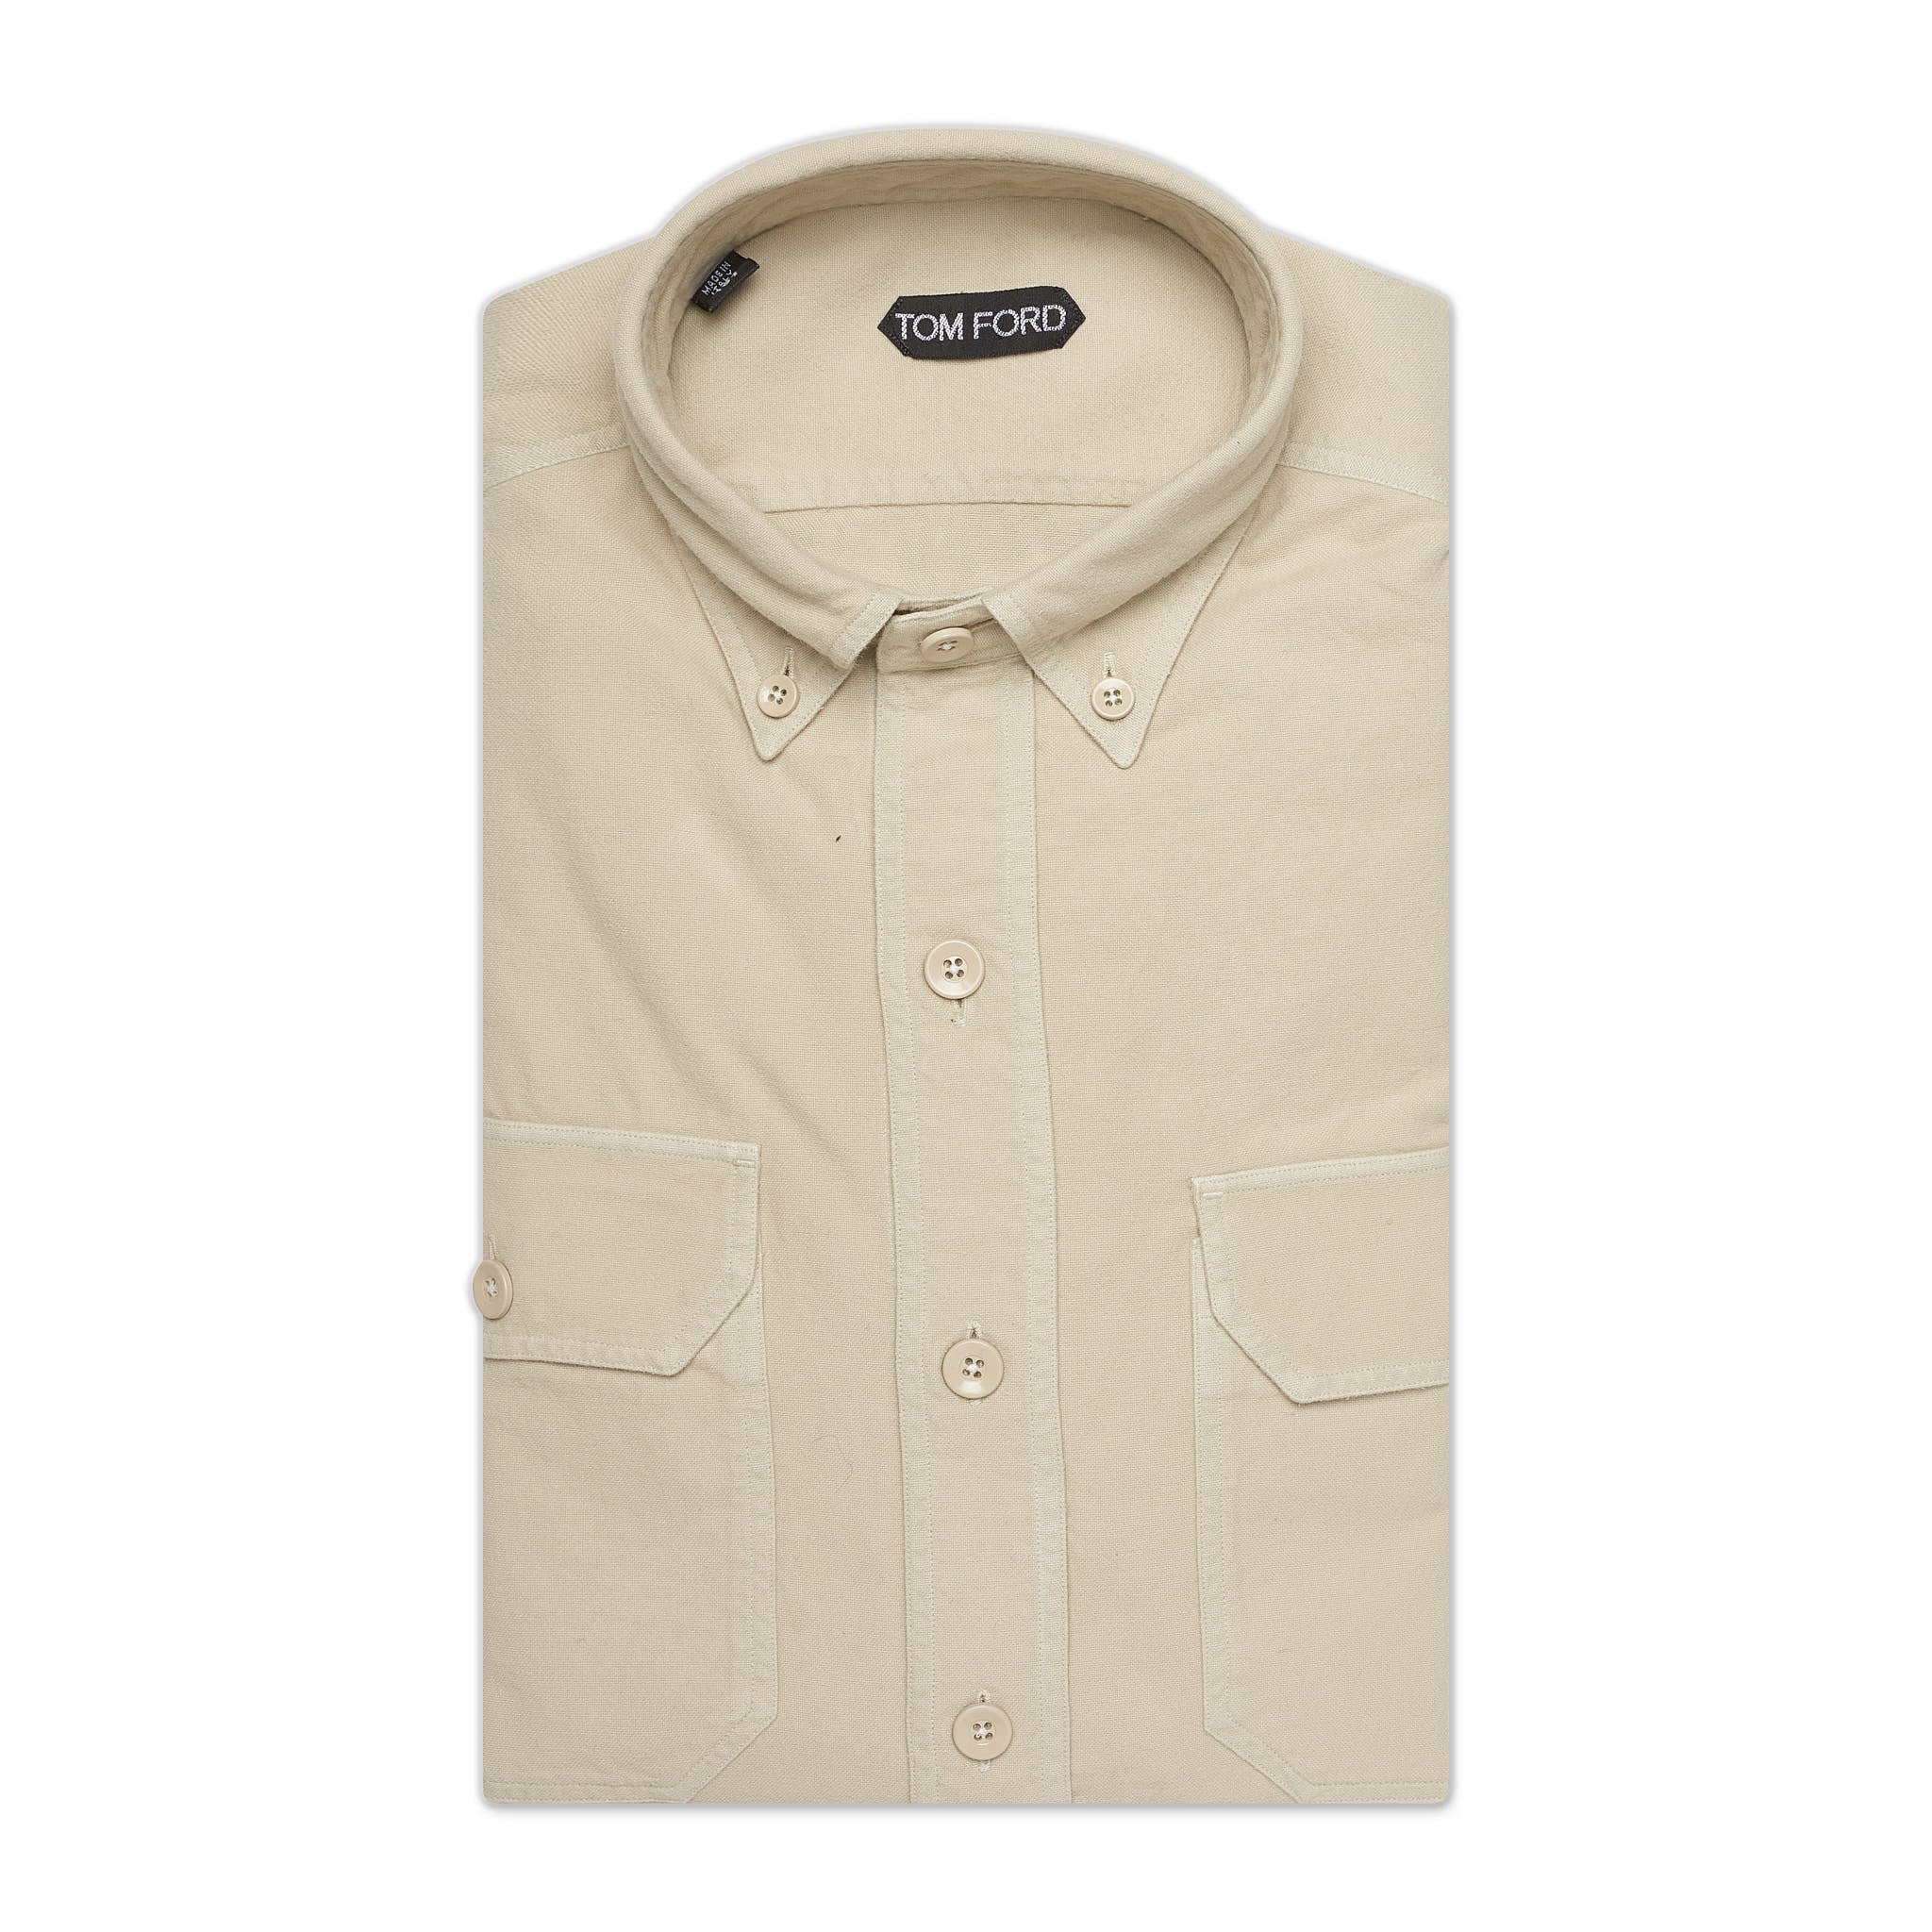 TOM FORD Solid Beige Cotton Button-Down Military Casual Shirt 39 NEW US 15.5